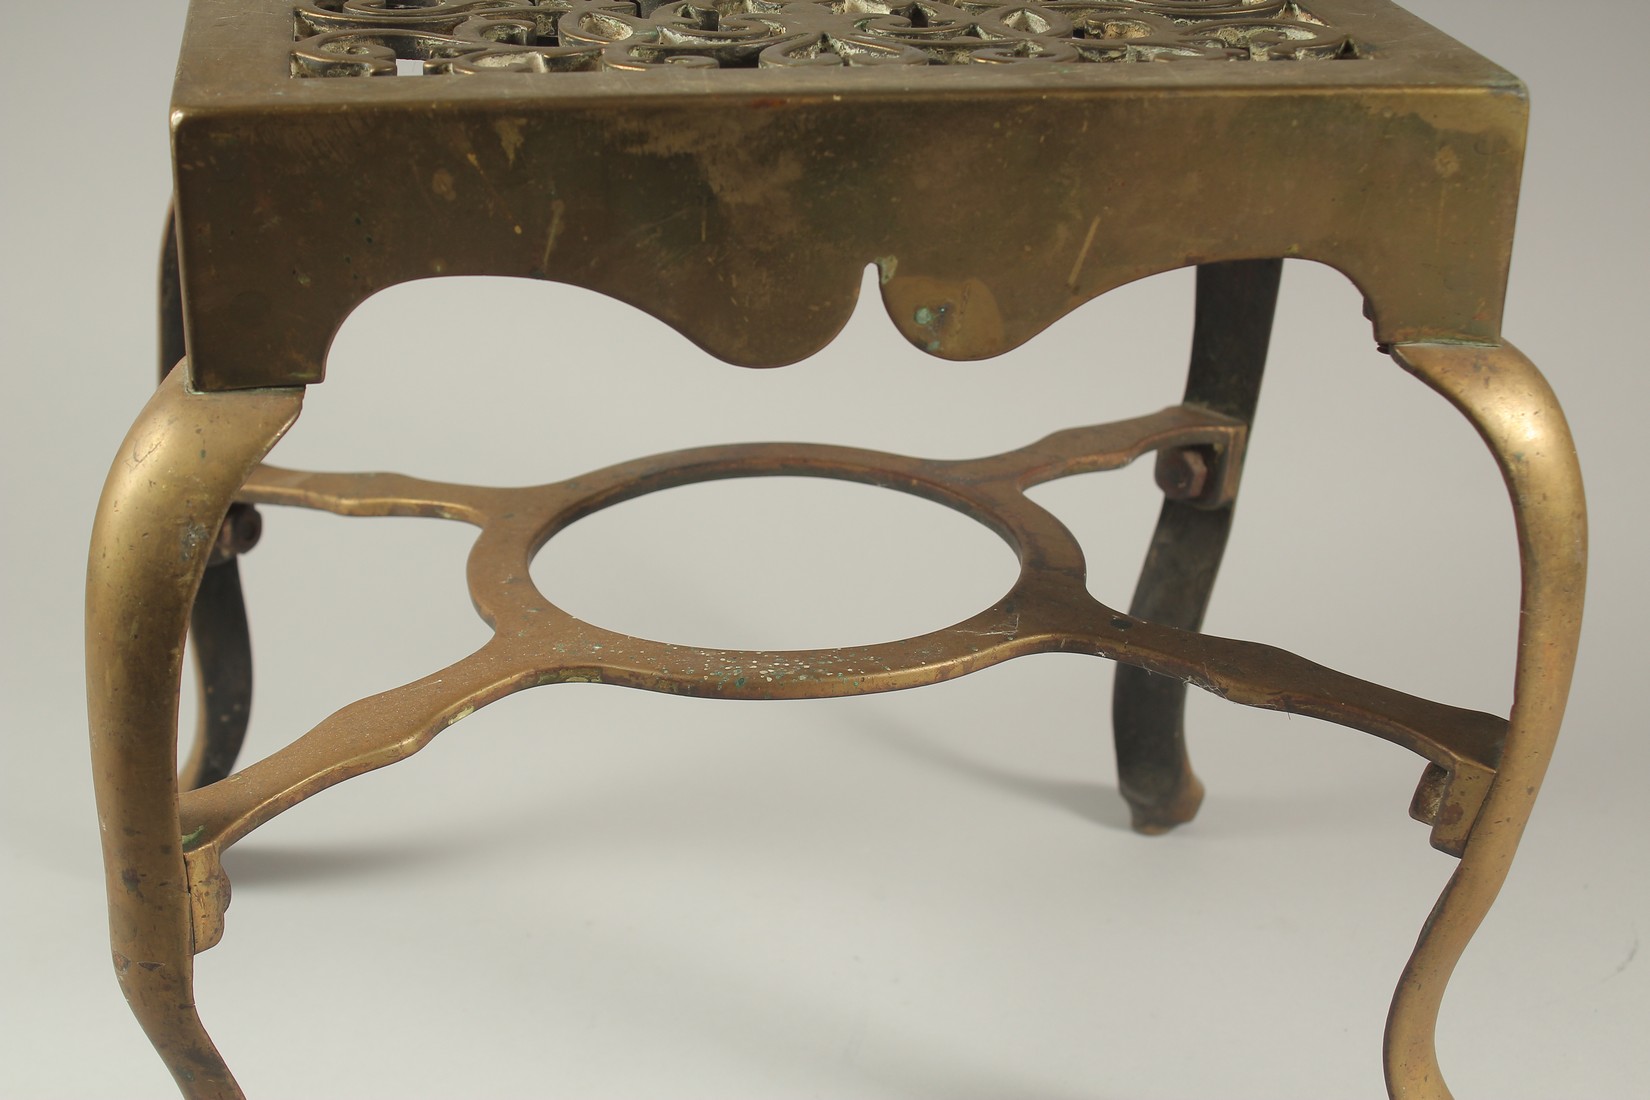 A LARGE BRASS TRIVET with pierced top and four curving legs. 1ft wide x 4ft high. - Image 3 of 3